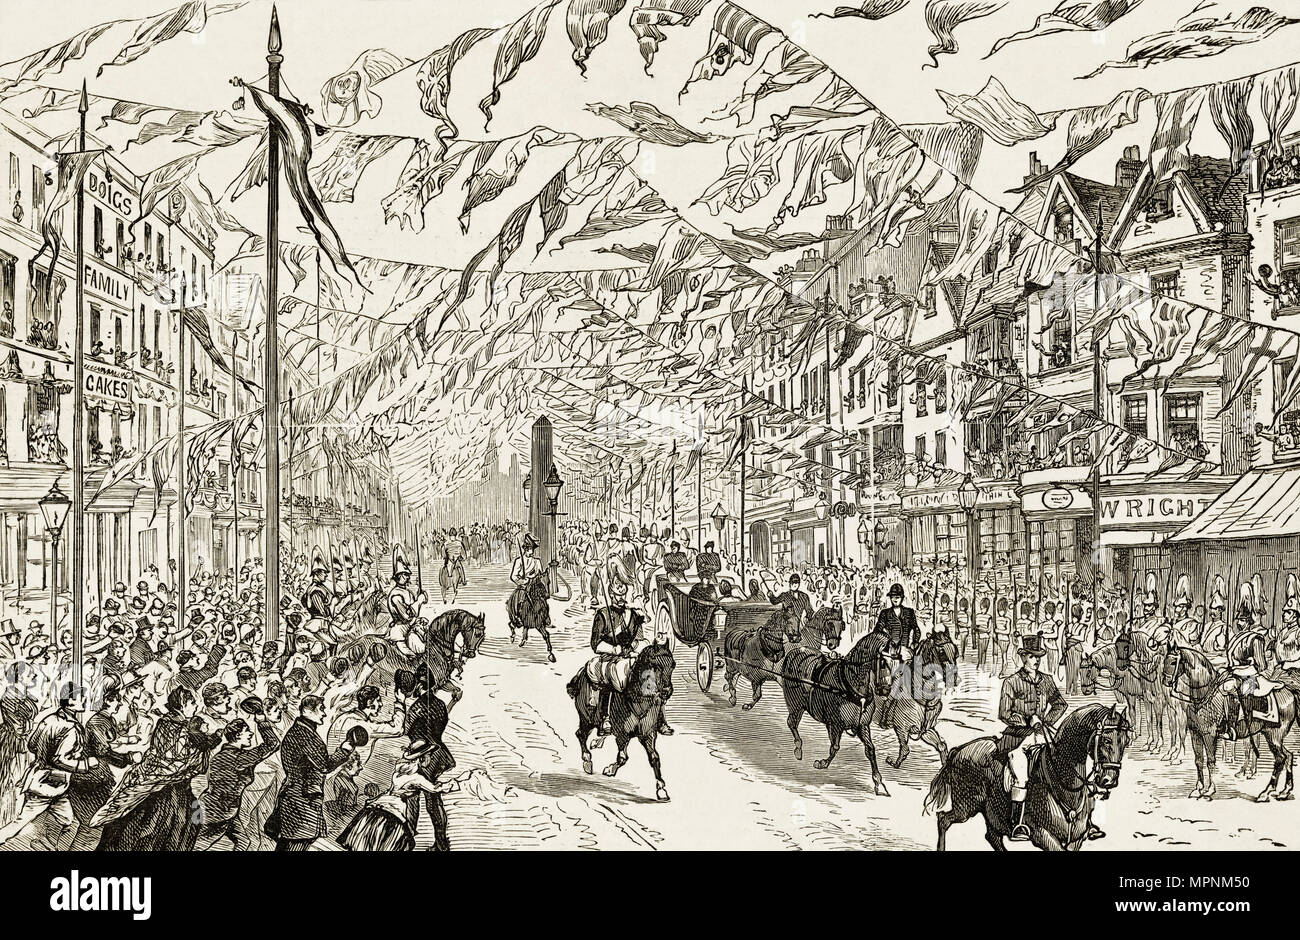 Queen Victoria royal procession along High Street Whitechapel East London England UK 14th May 1887 with bunting & crowds cheering. 19th century Victorian engraving circa 1887 Stock Photo